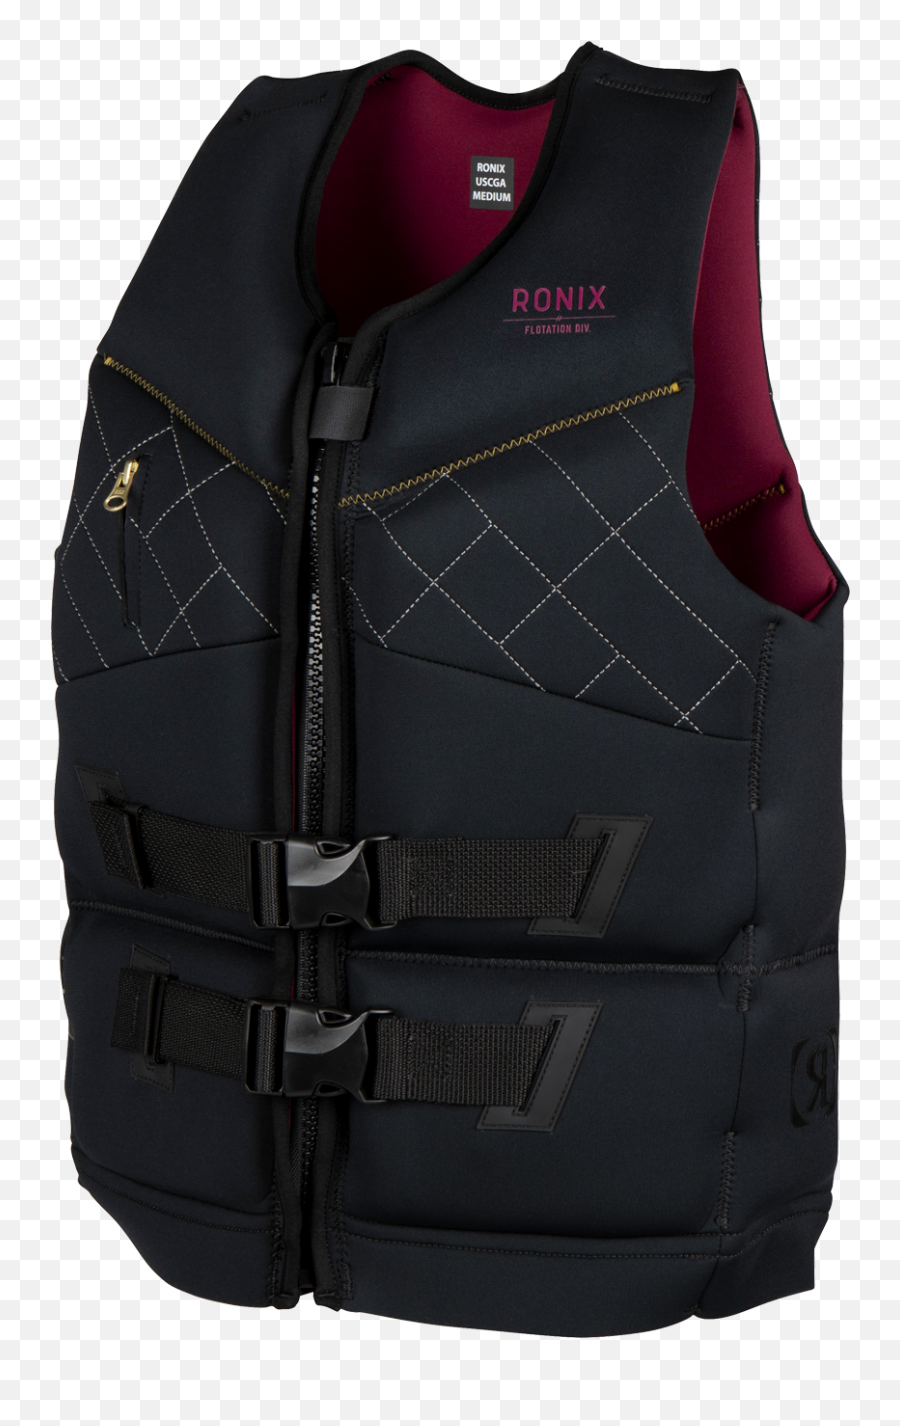 Ronix Vest Supernova - Cga Vest Ronix Wakeboards Boots Sleeveless Png,Icon Vest Size Chart